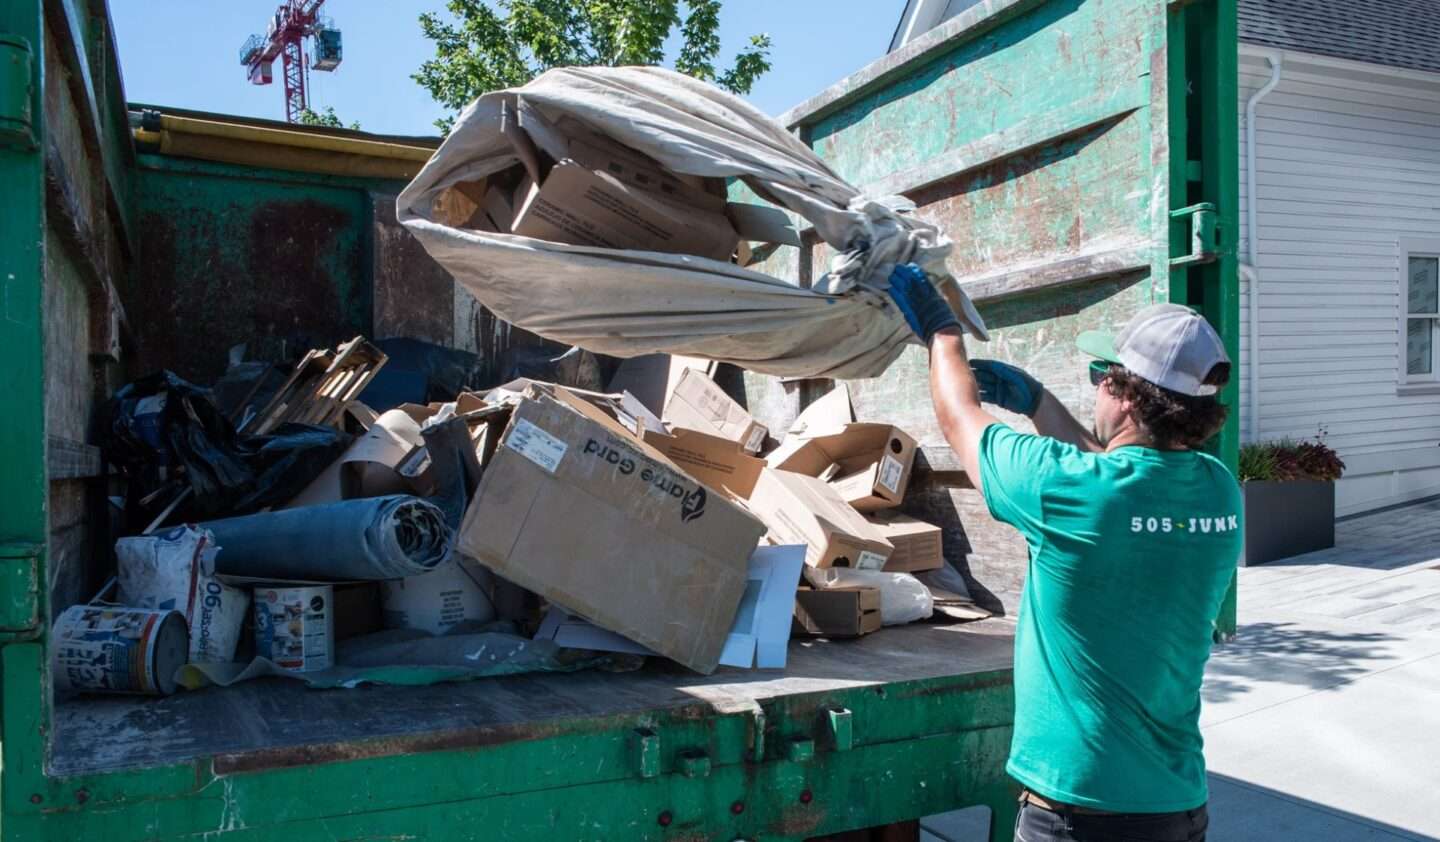 505-Junk team member throwing material into the back of the truck during a rubbish removal in Burnaby